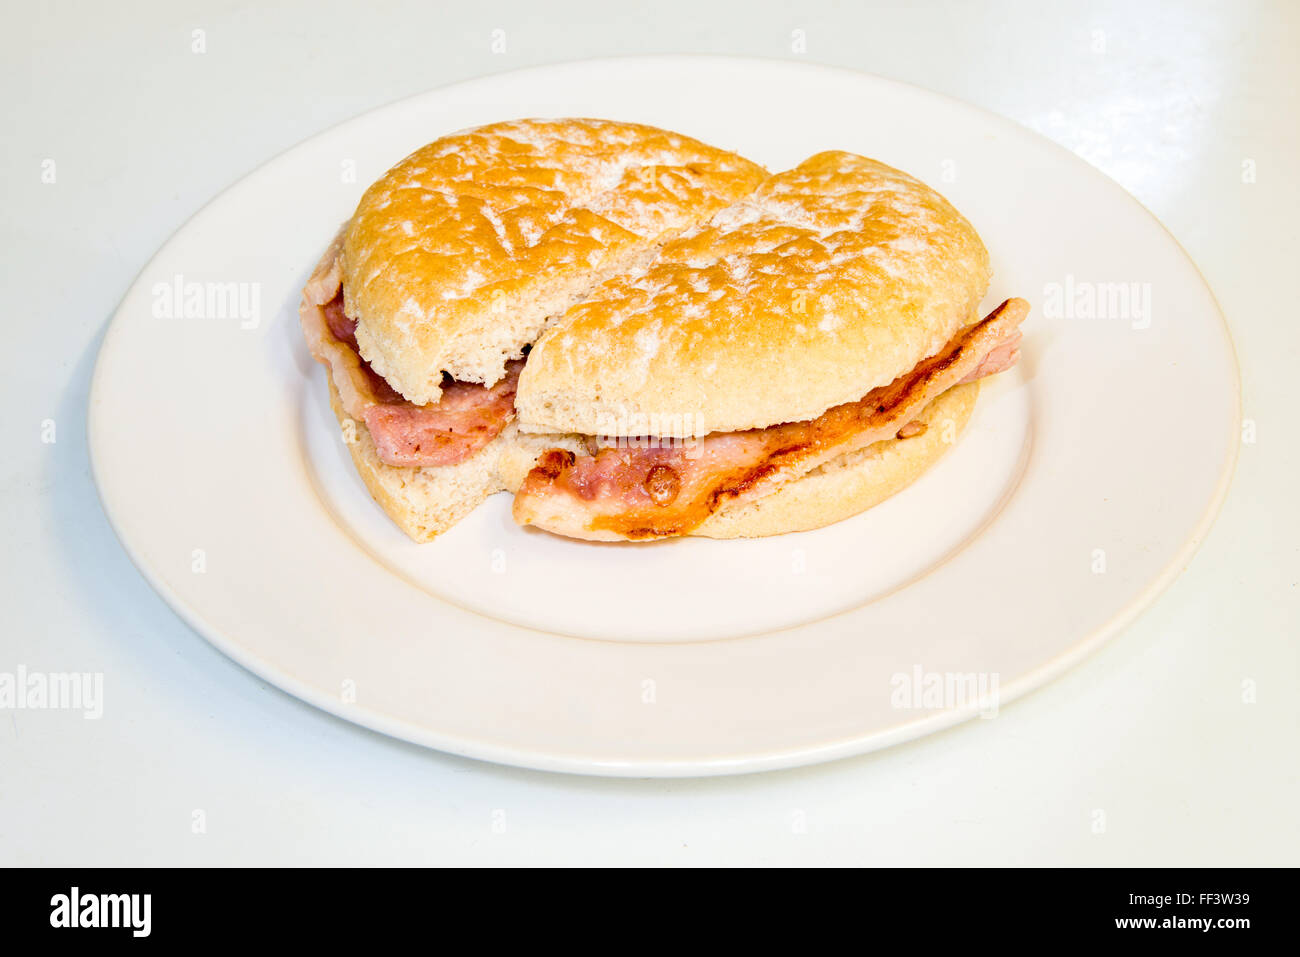 Small bread bun with bacon inside cut on a plate Stock Photo